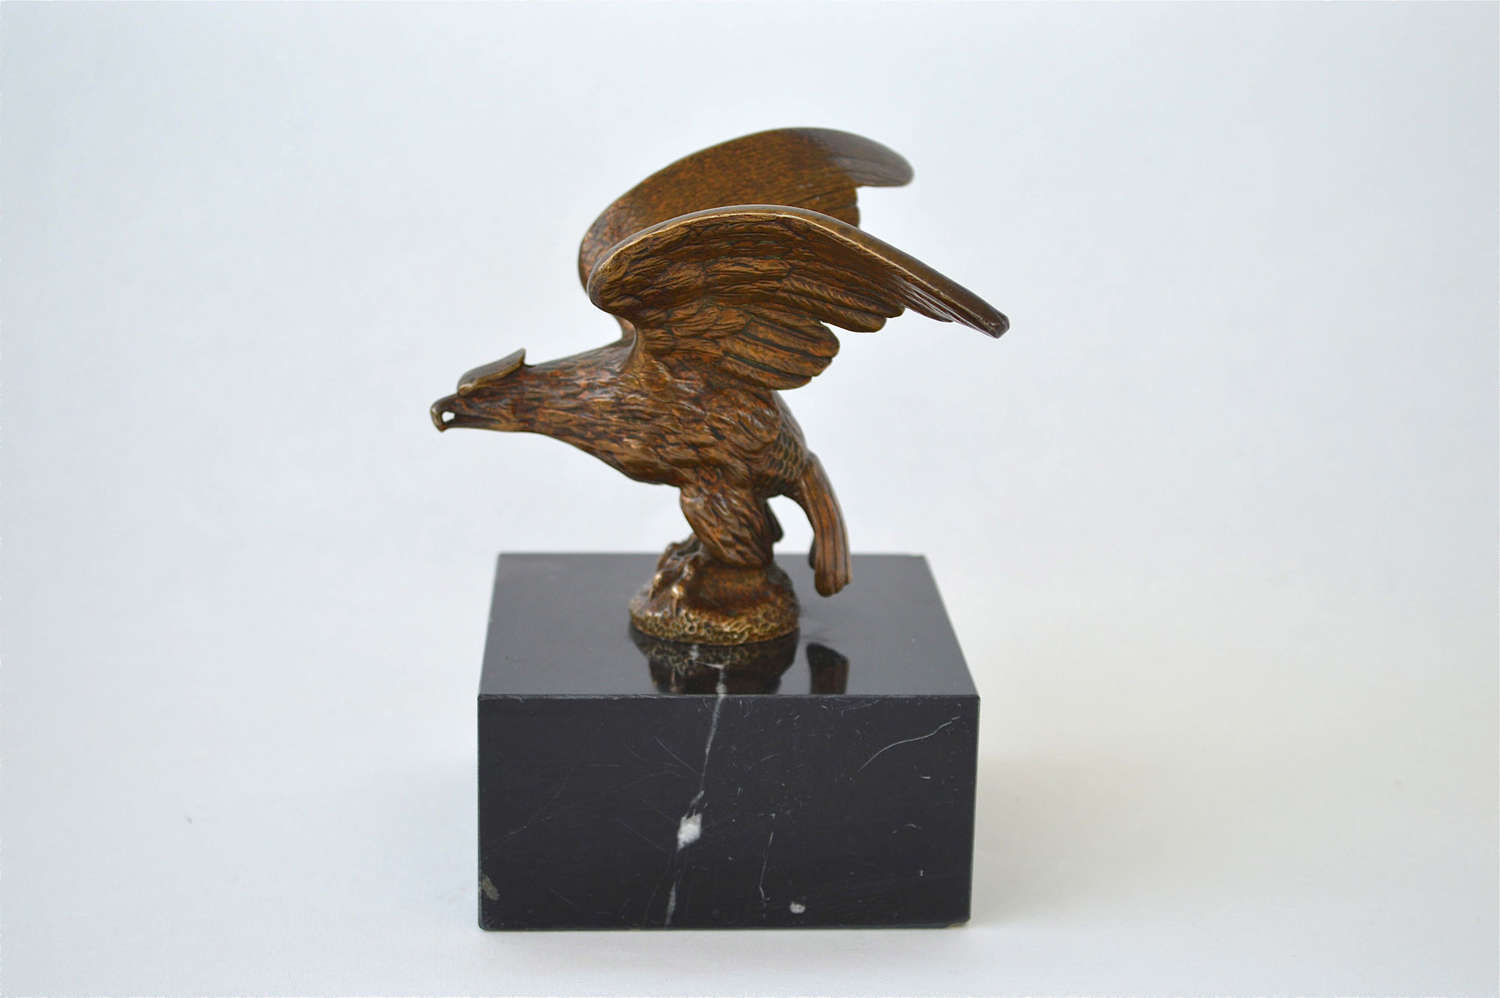 A very nice quality bronze sculpture of an eagle